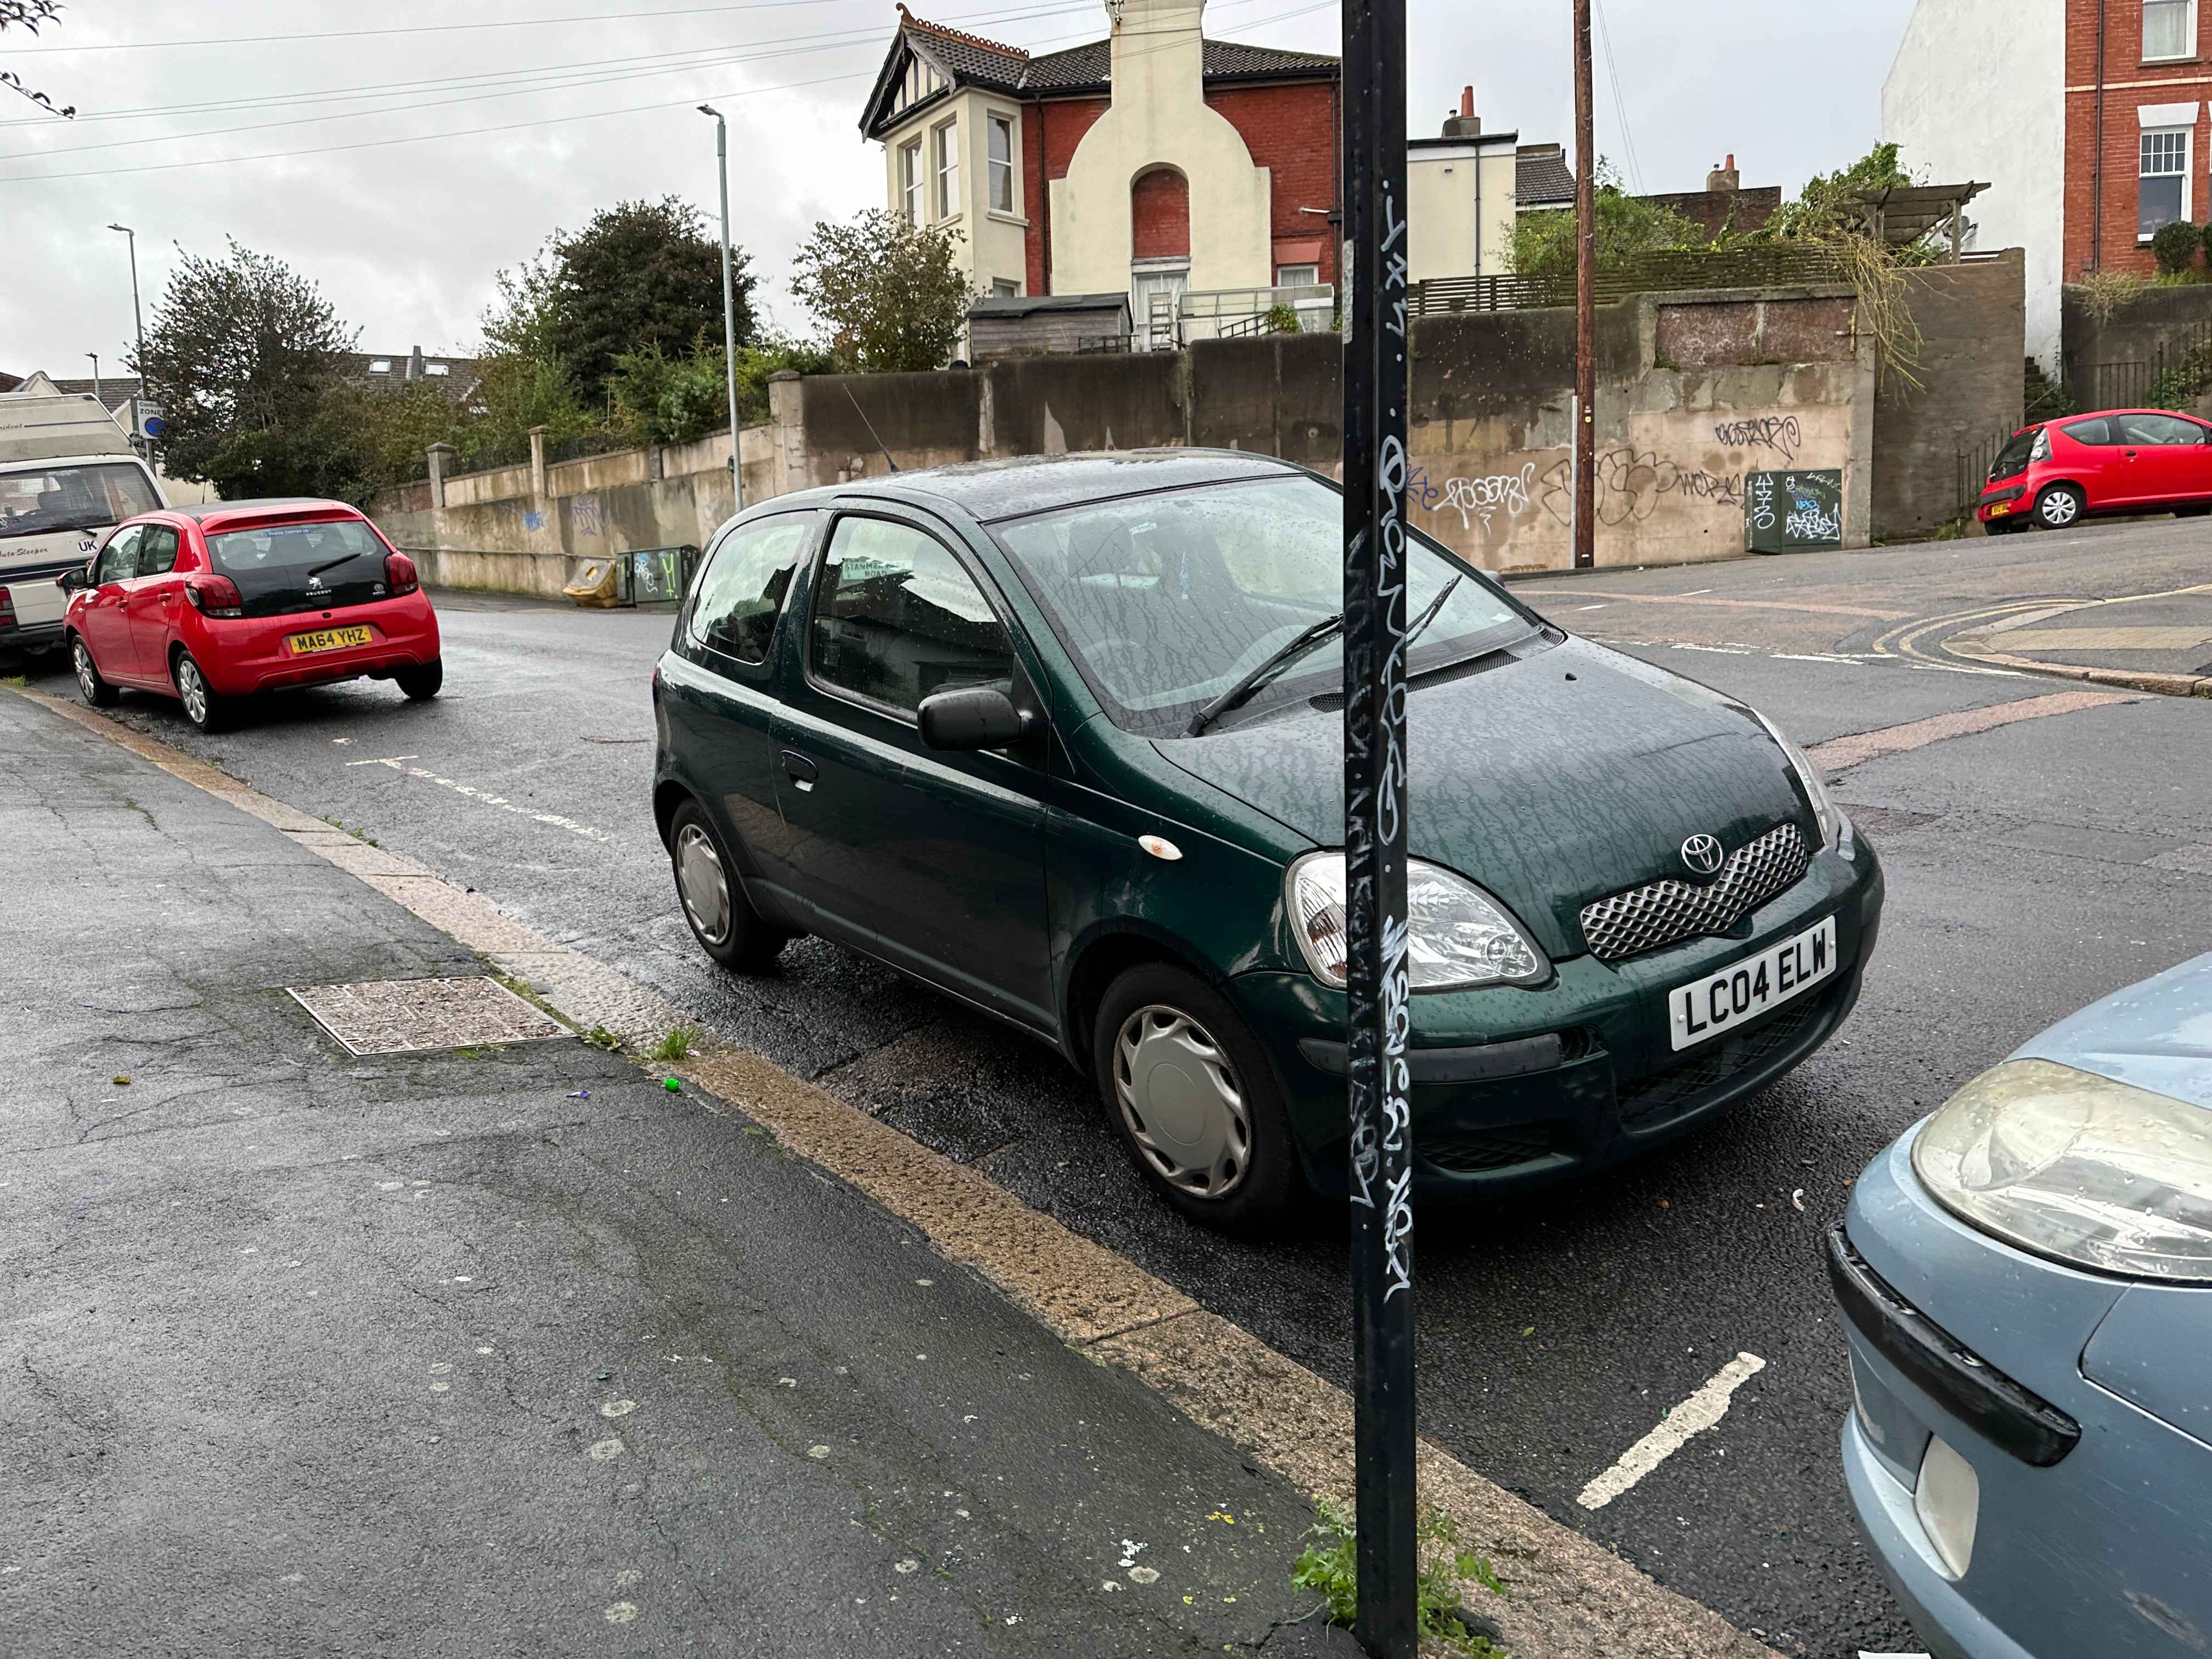 Photograph of LC04 ELW - a Green Toyota Yaris parked in Hollingdean by a non-resident. The fifth of ten photographs supplied by the residents of Hollingdean.